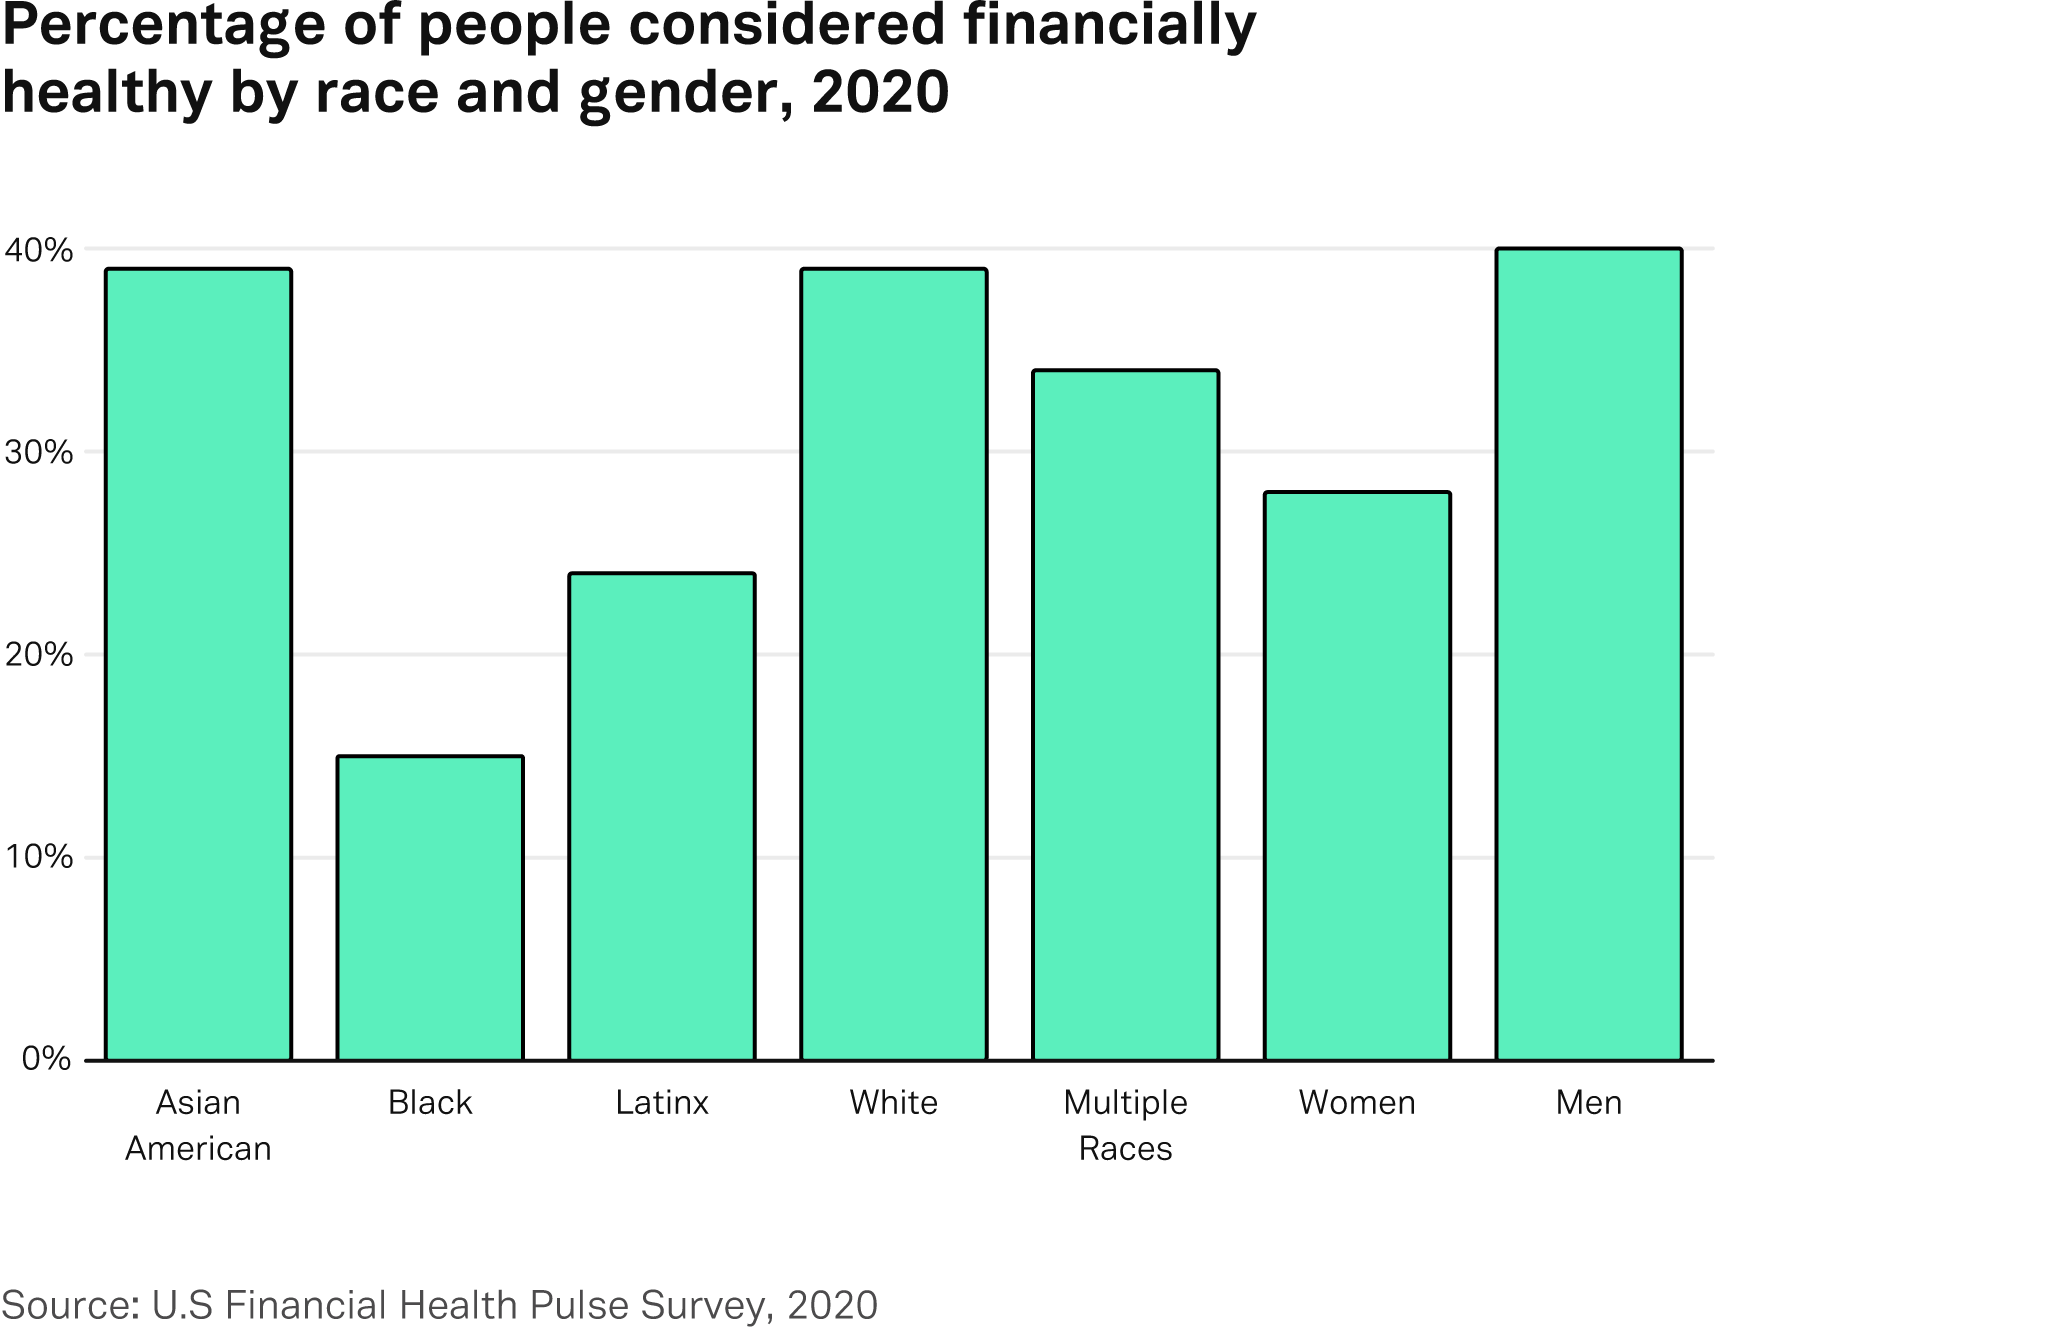 Percentage of people considered financially healthy by race and gender, 2020
